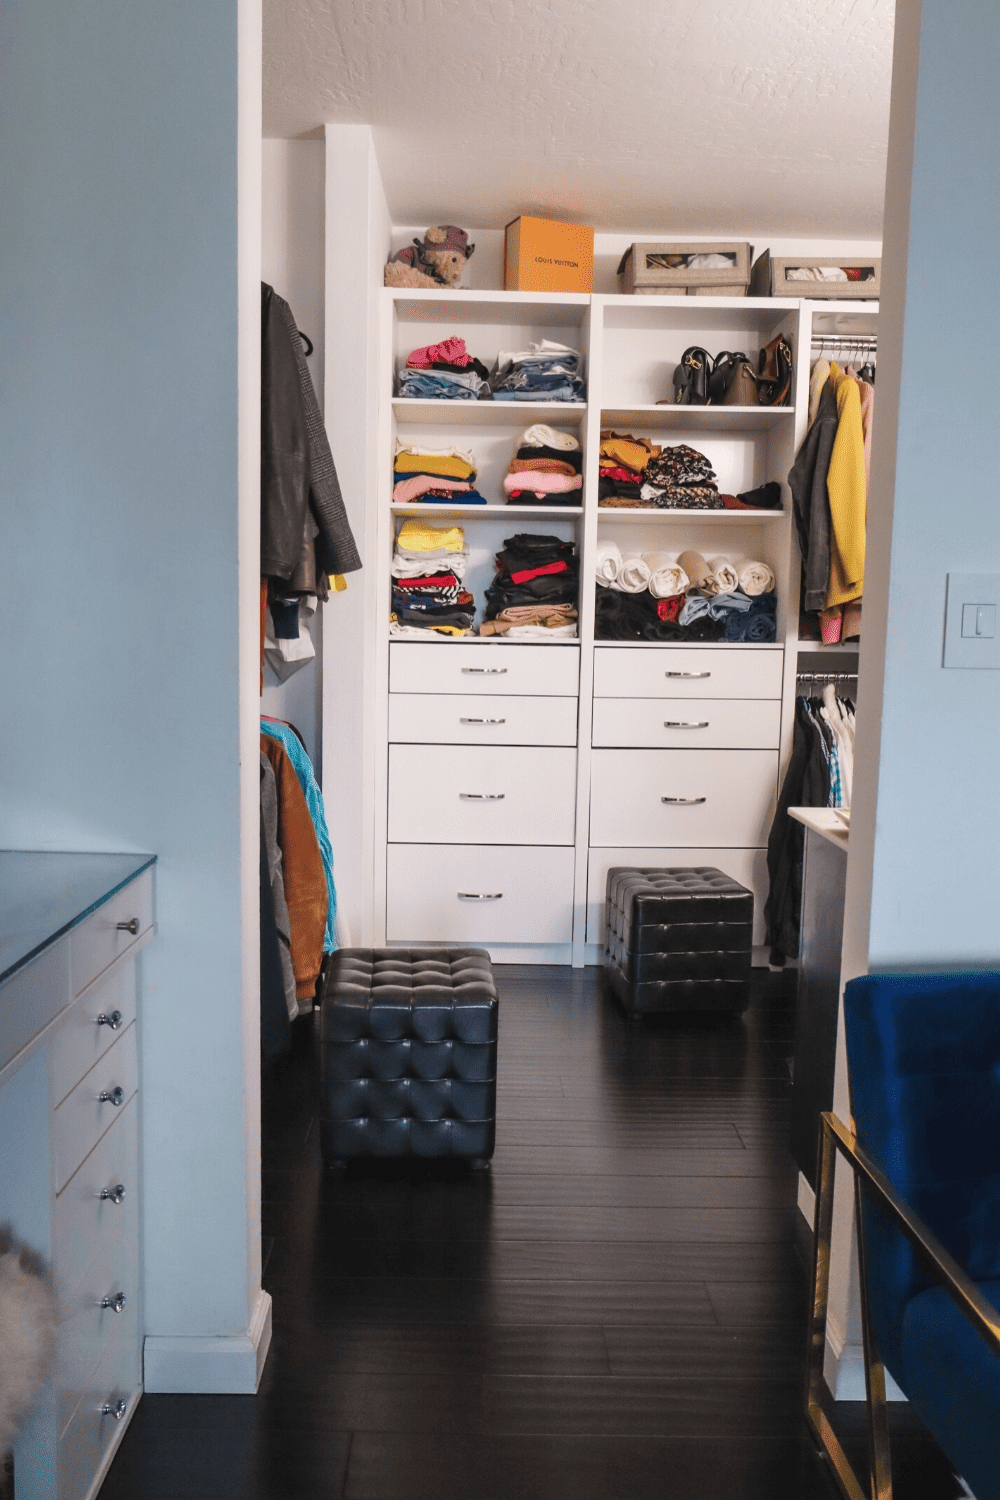 How To Make The Most Of Your Existing Wardrobe - A Step By Step Guide to Organizing